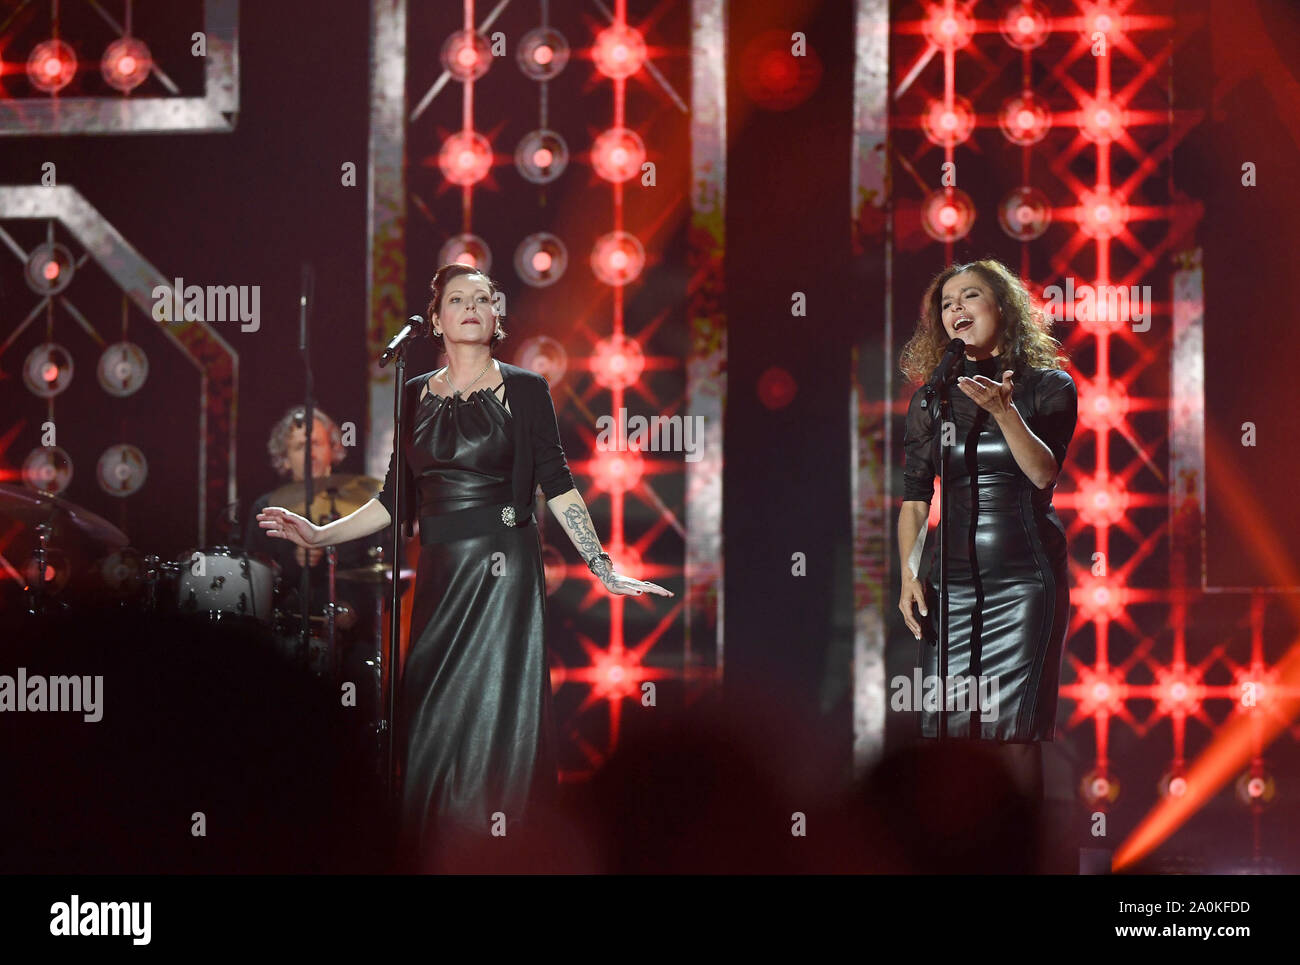 Leipzig, Germany. 20th Sep, 2019. The German band Silly with the singers AnNa R. (l) and Julia Neigel sing 'Goldene Henne' during the TV gala. A total of 53 nominees from show business, society and sport can hope for the award. The Golden Hen is dedicated to the GDR entertainer Hahnemann, who died in 1991. Credit: Hendrik Schmidt/dpa-Zentralbild/dpa/Alamy Live News Stock Photo